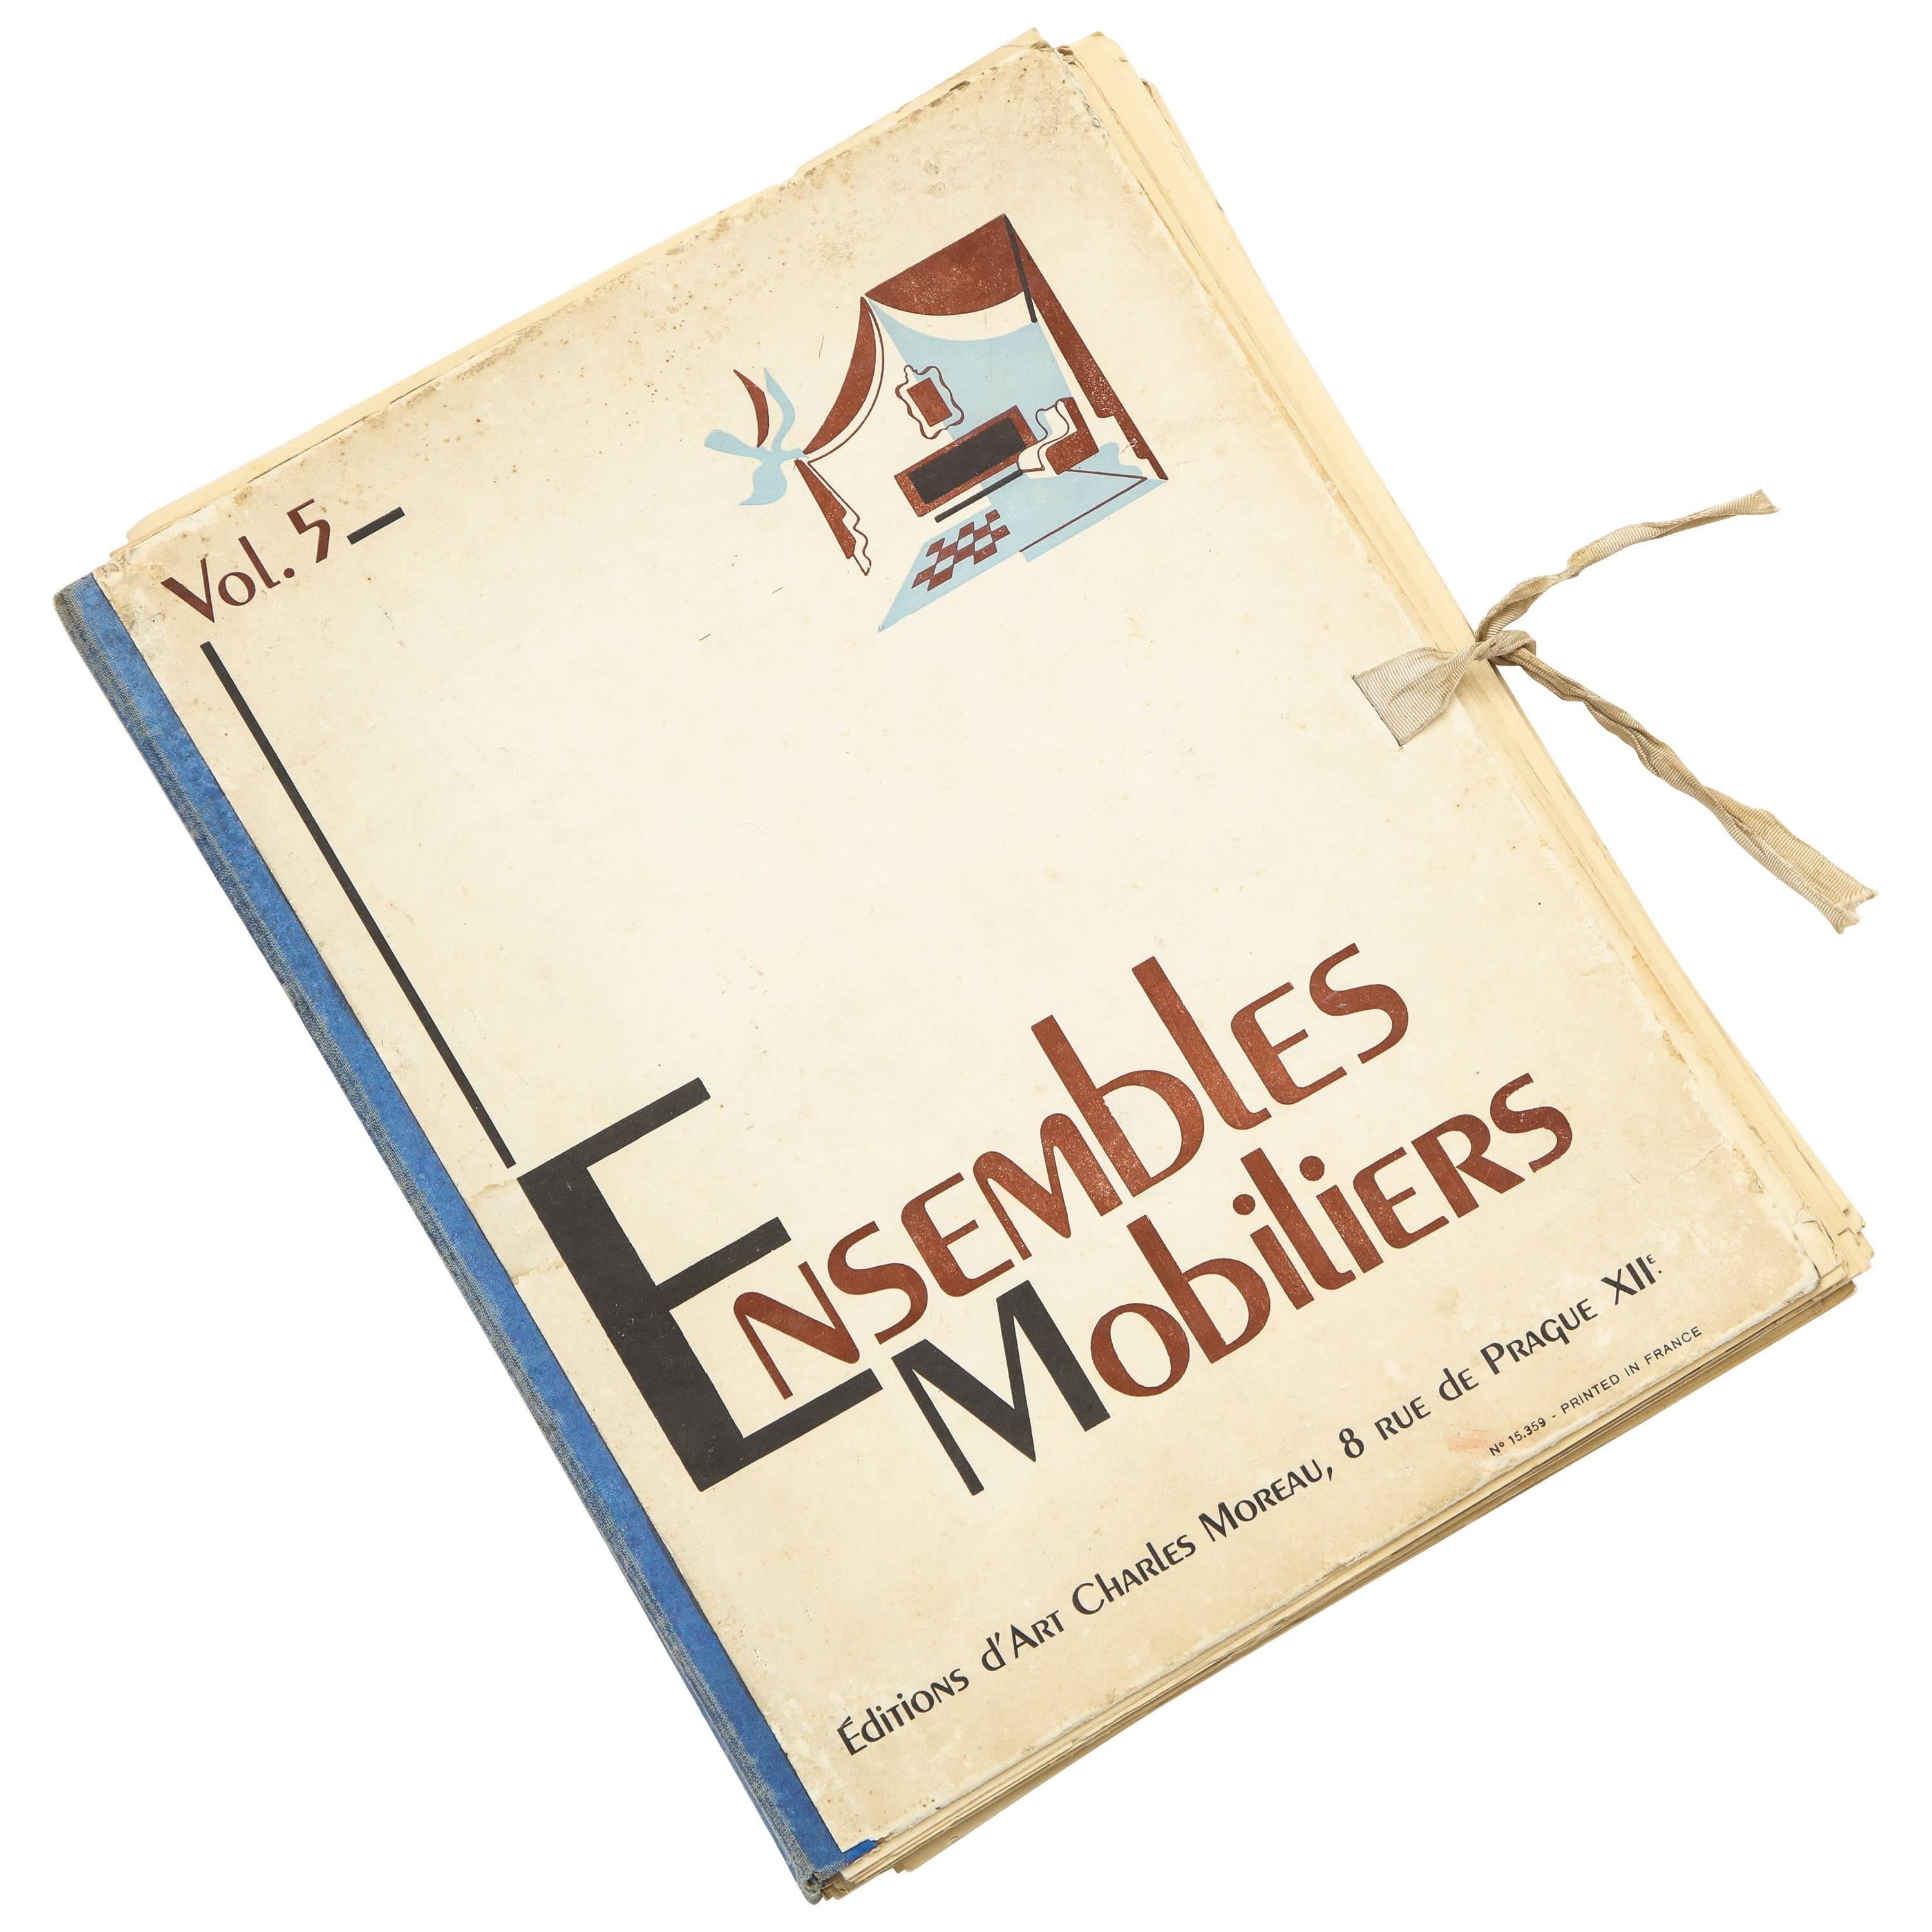 Ensembles Mobiliers, Charles Moreau Editor Deco Book, 1930s-1940s, France For Sale